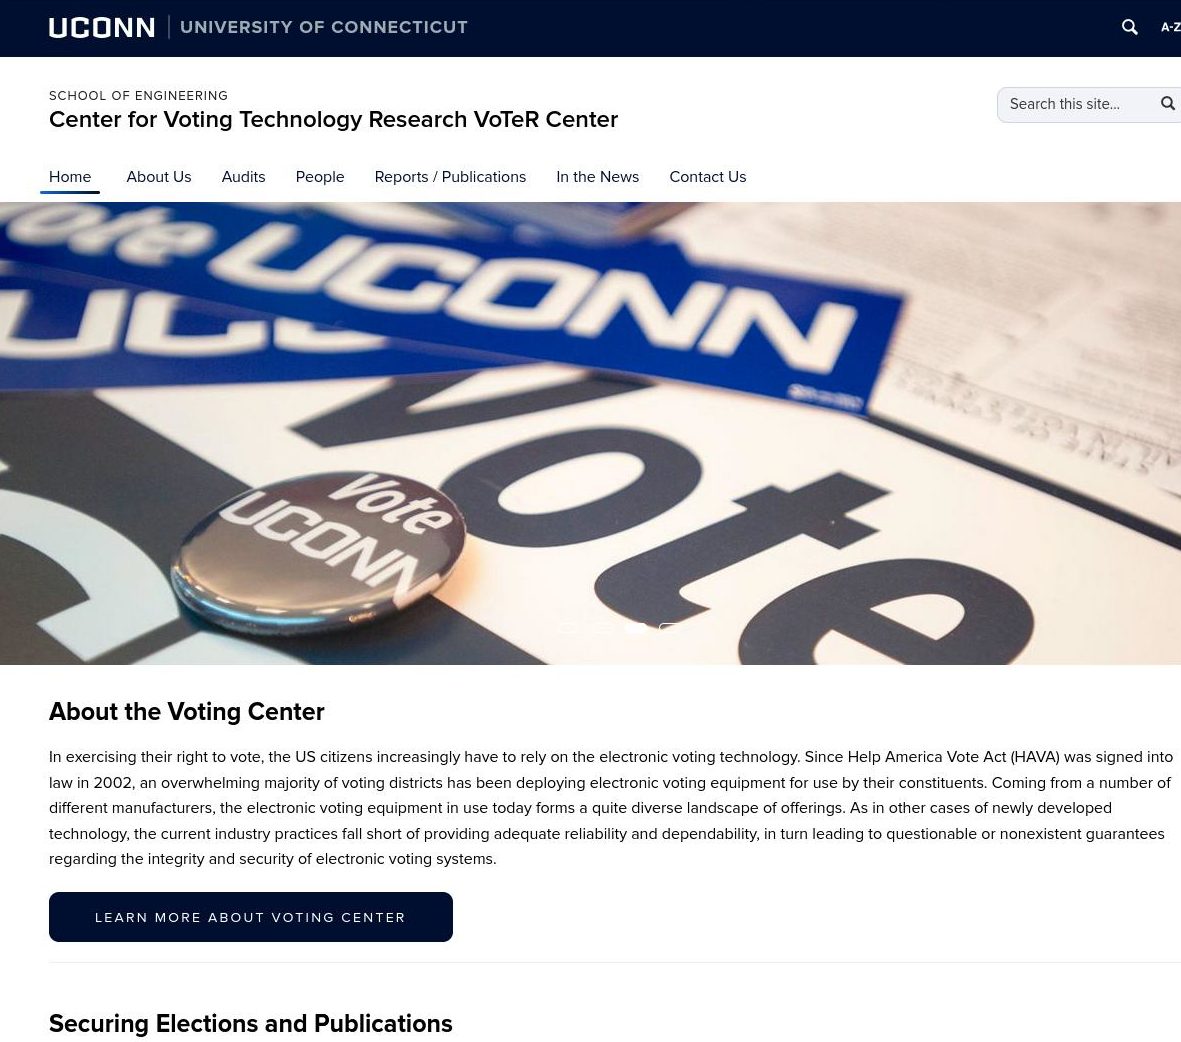 Center for Voting Technology Research VoTeR Center